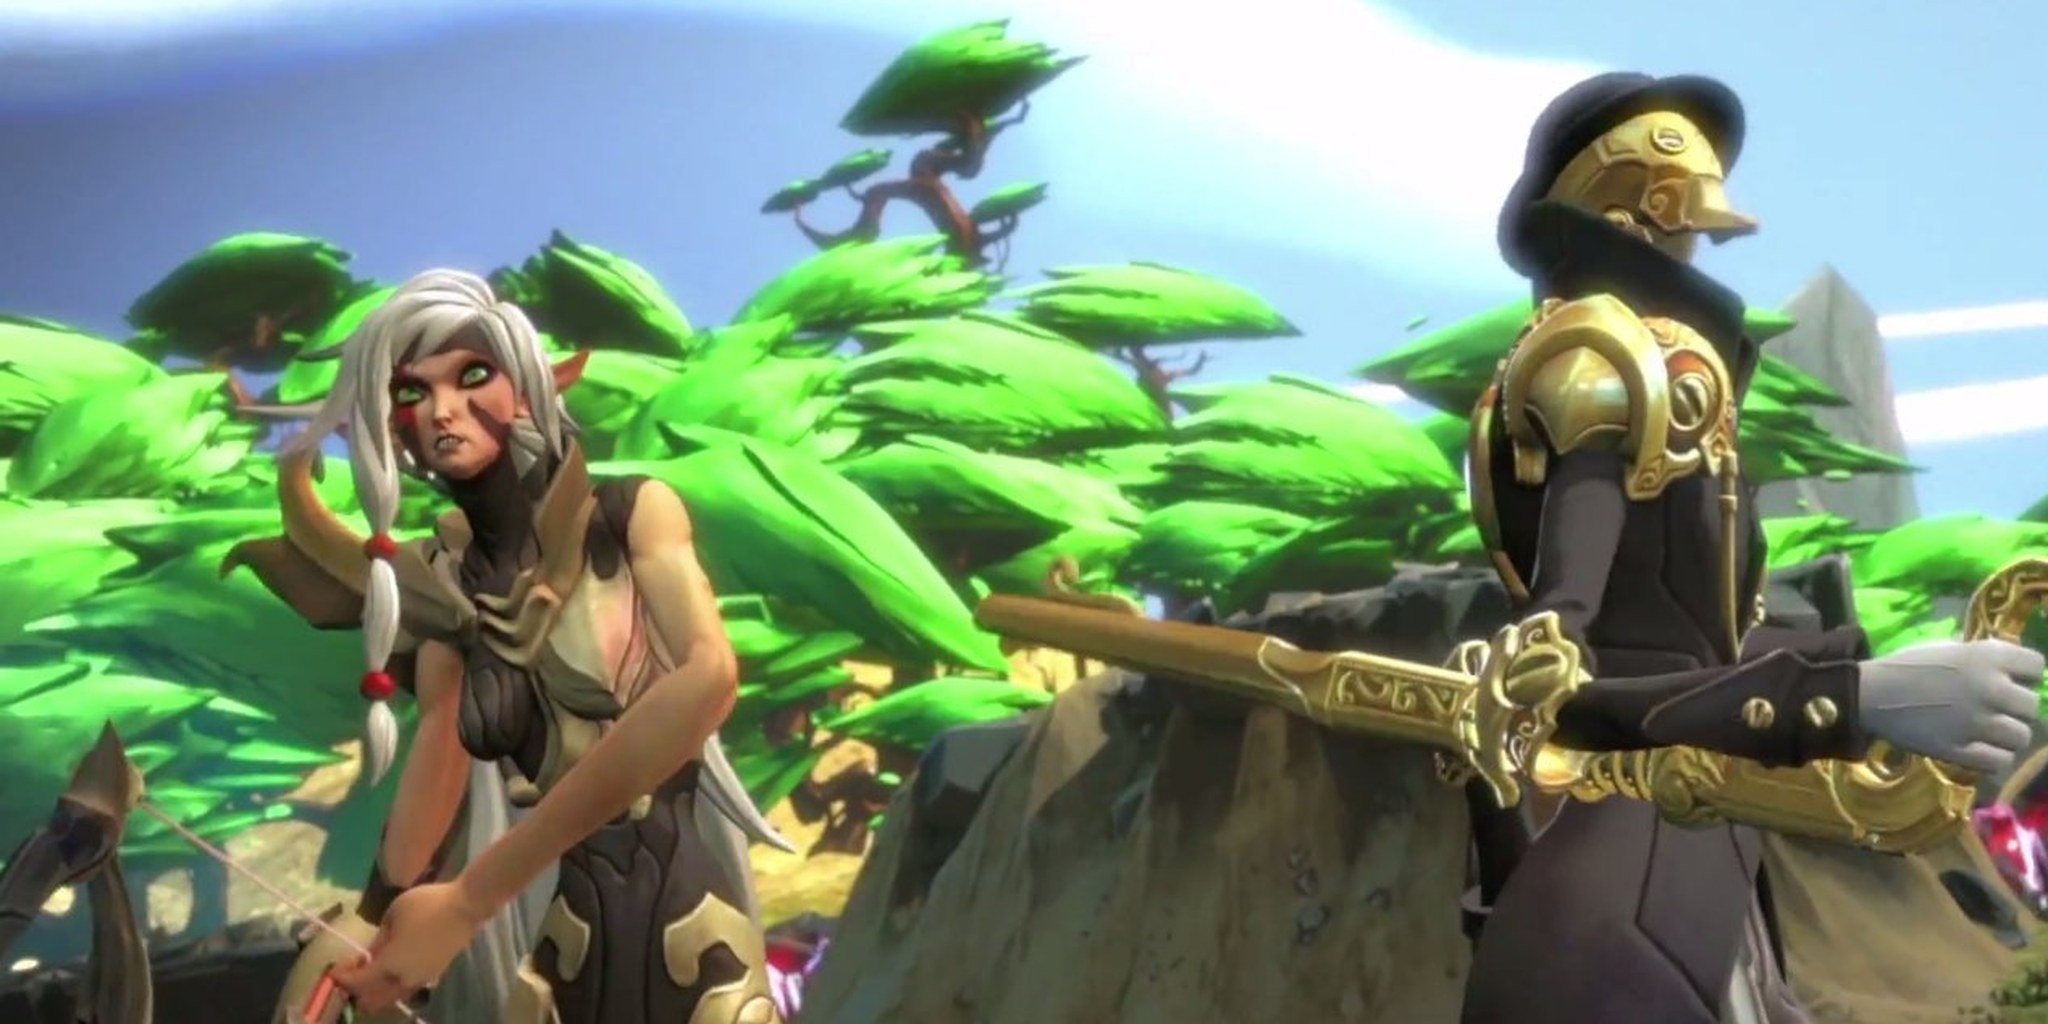 MOBAs To Watch In 2015 - Game Informer